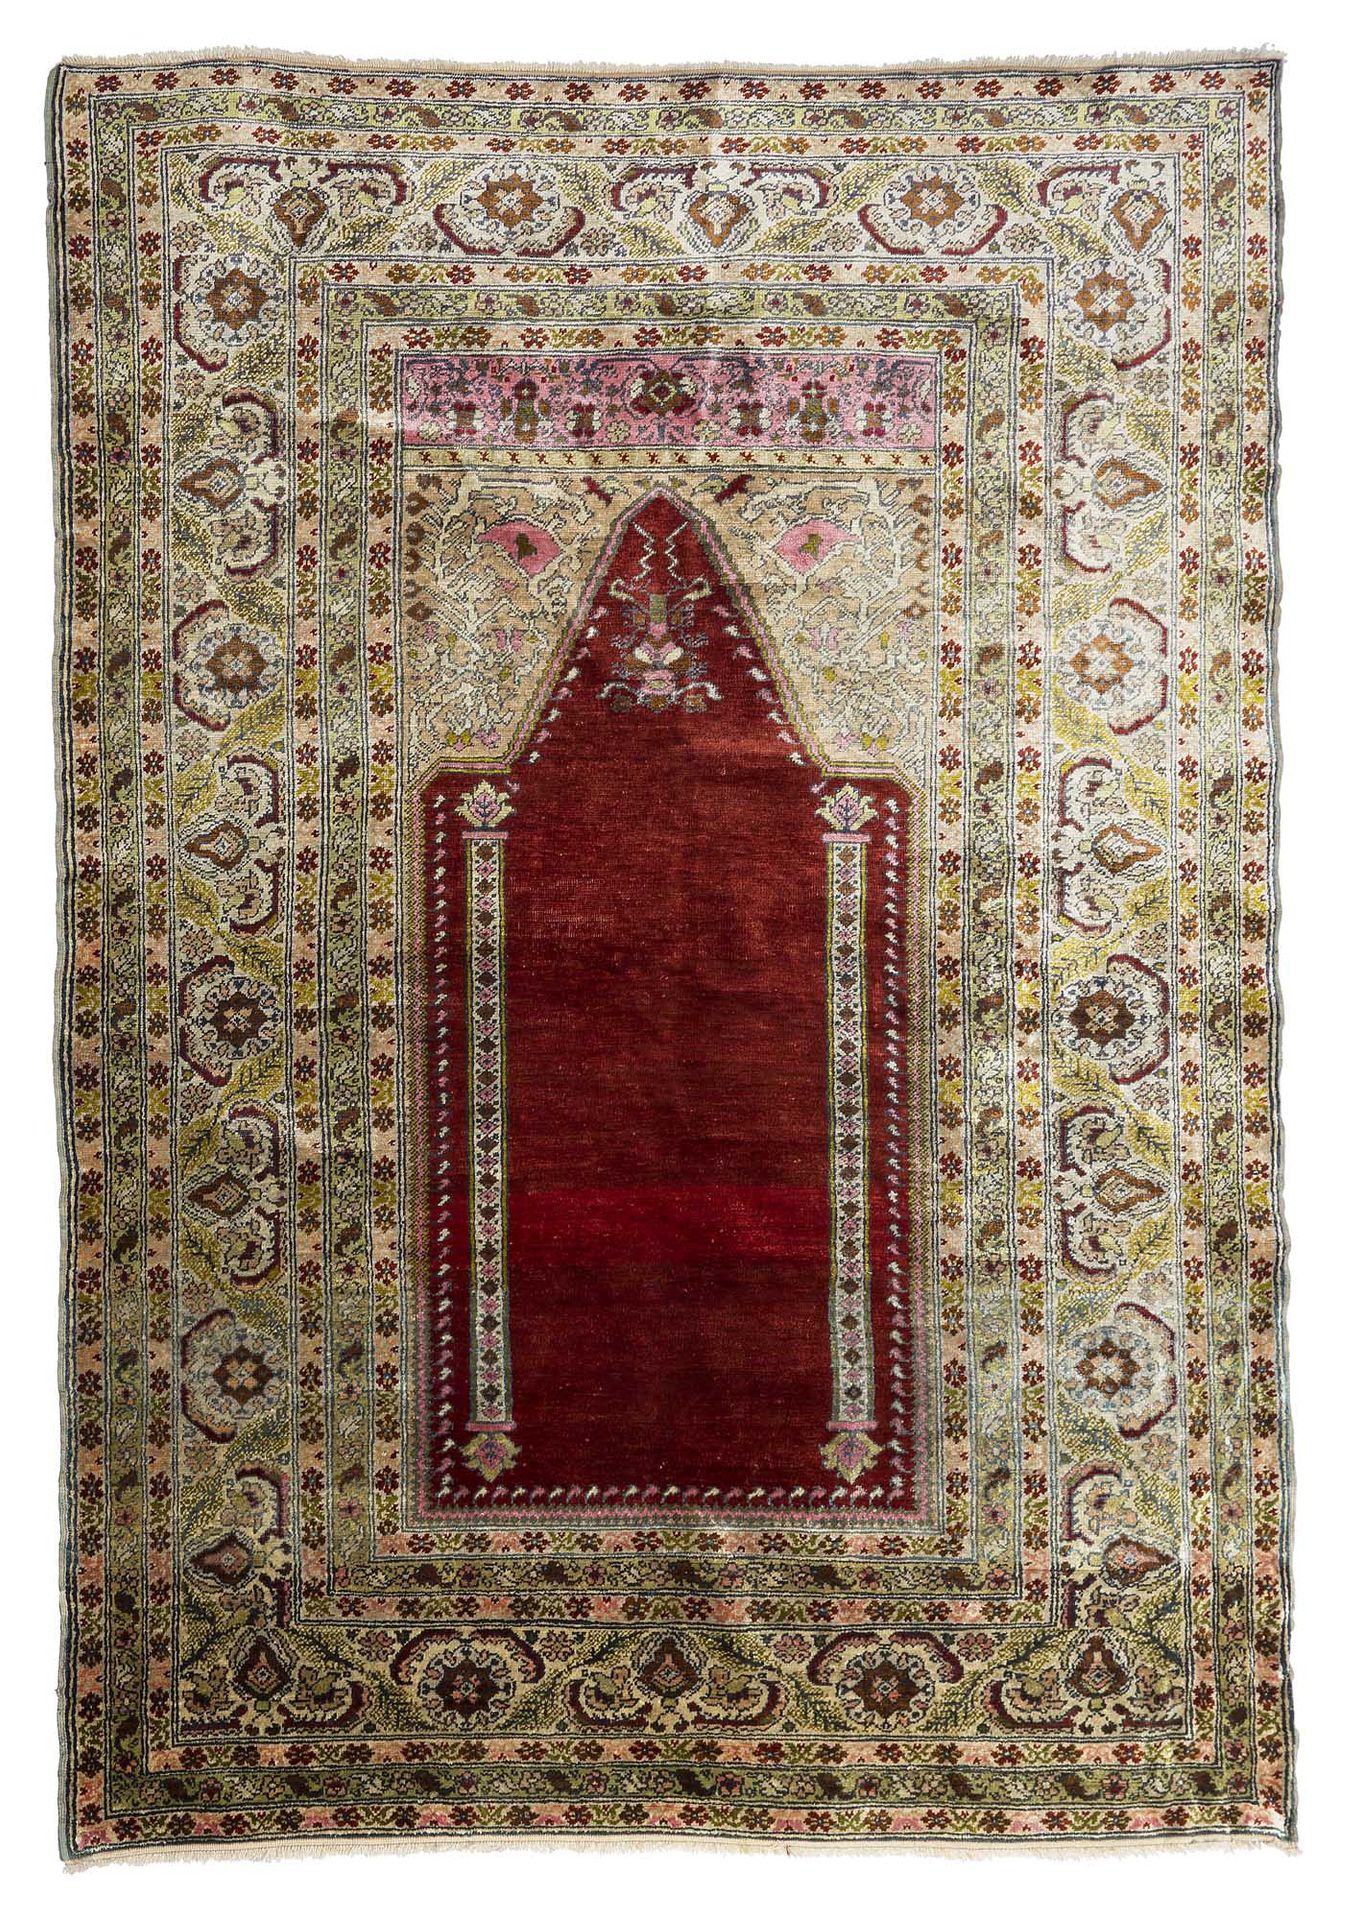 Null Silk KAYCÉRI carpet (Asia Minor), early 20th century

Dimensions : 157 x 12&hellip;